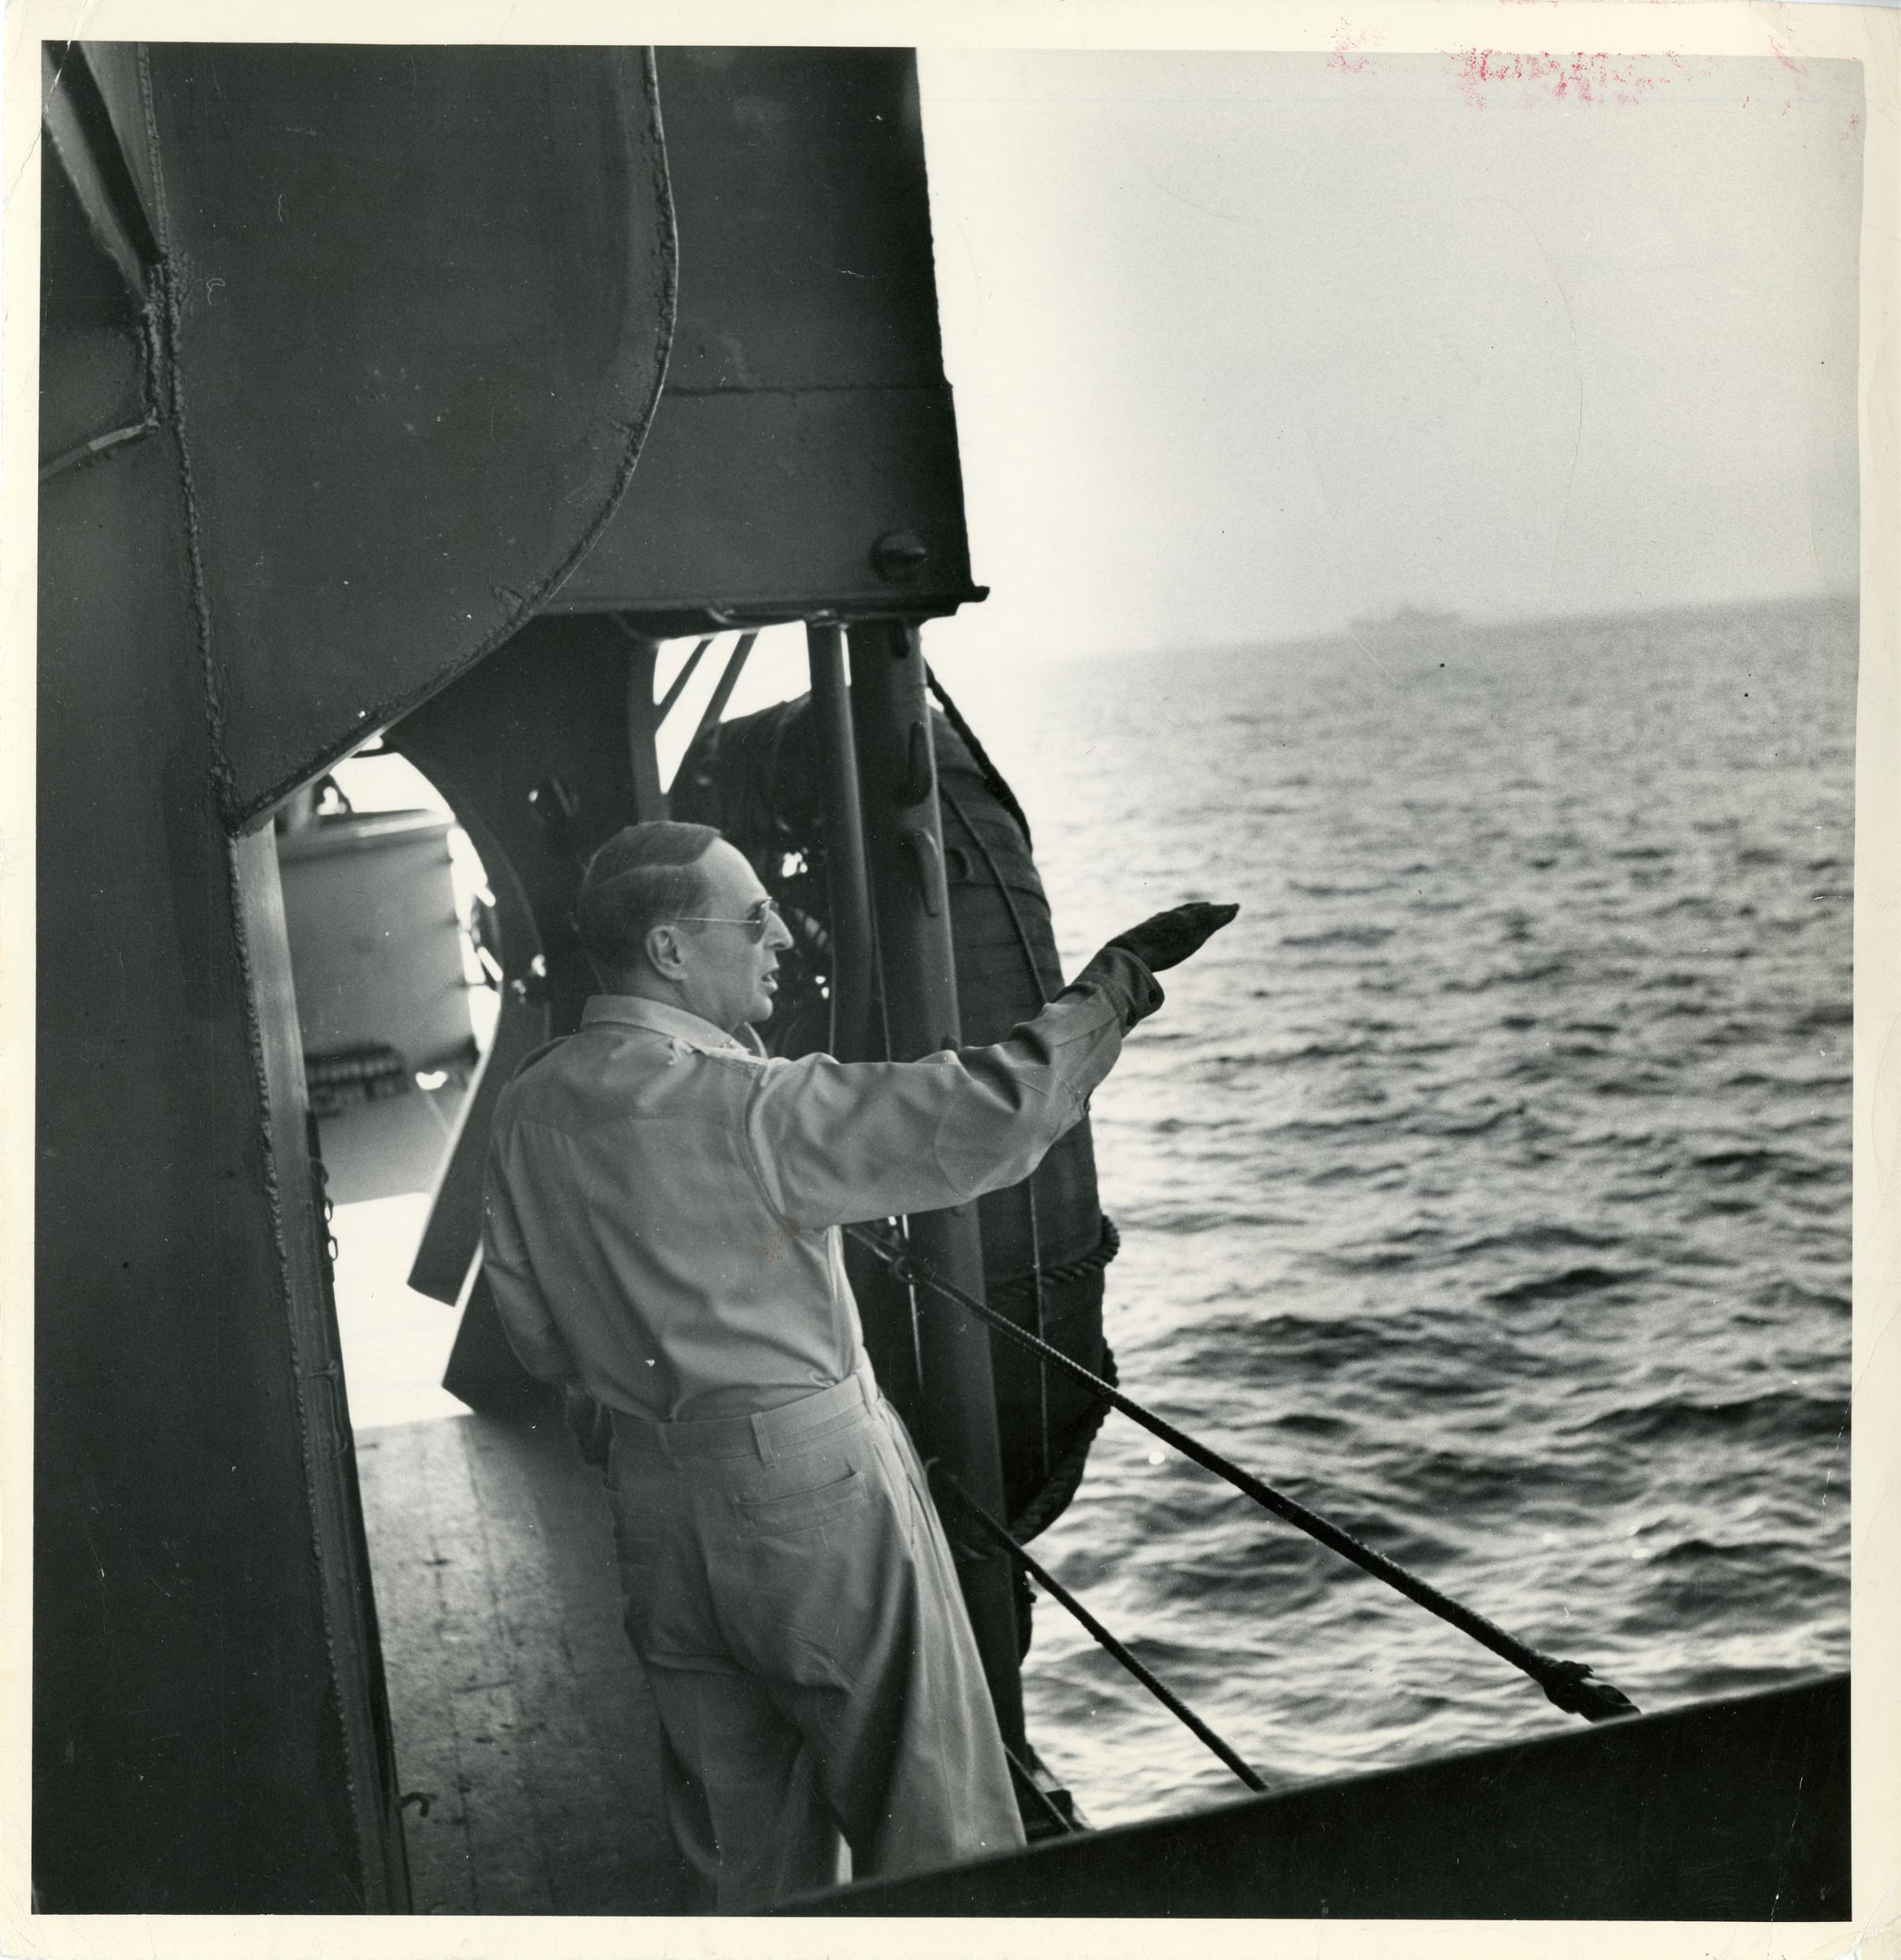 Text from the back of the print in LIFE's archives: "On way to Luzon Jan. 1945 - Landing Operation- Gen. Douglas MacArthur aboard ship."